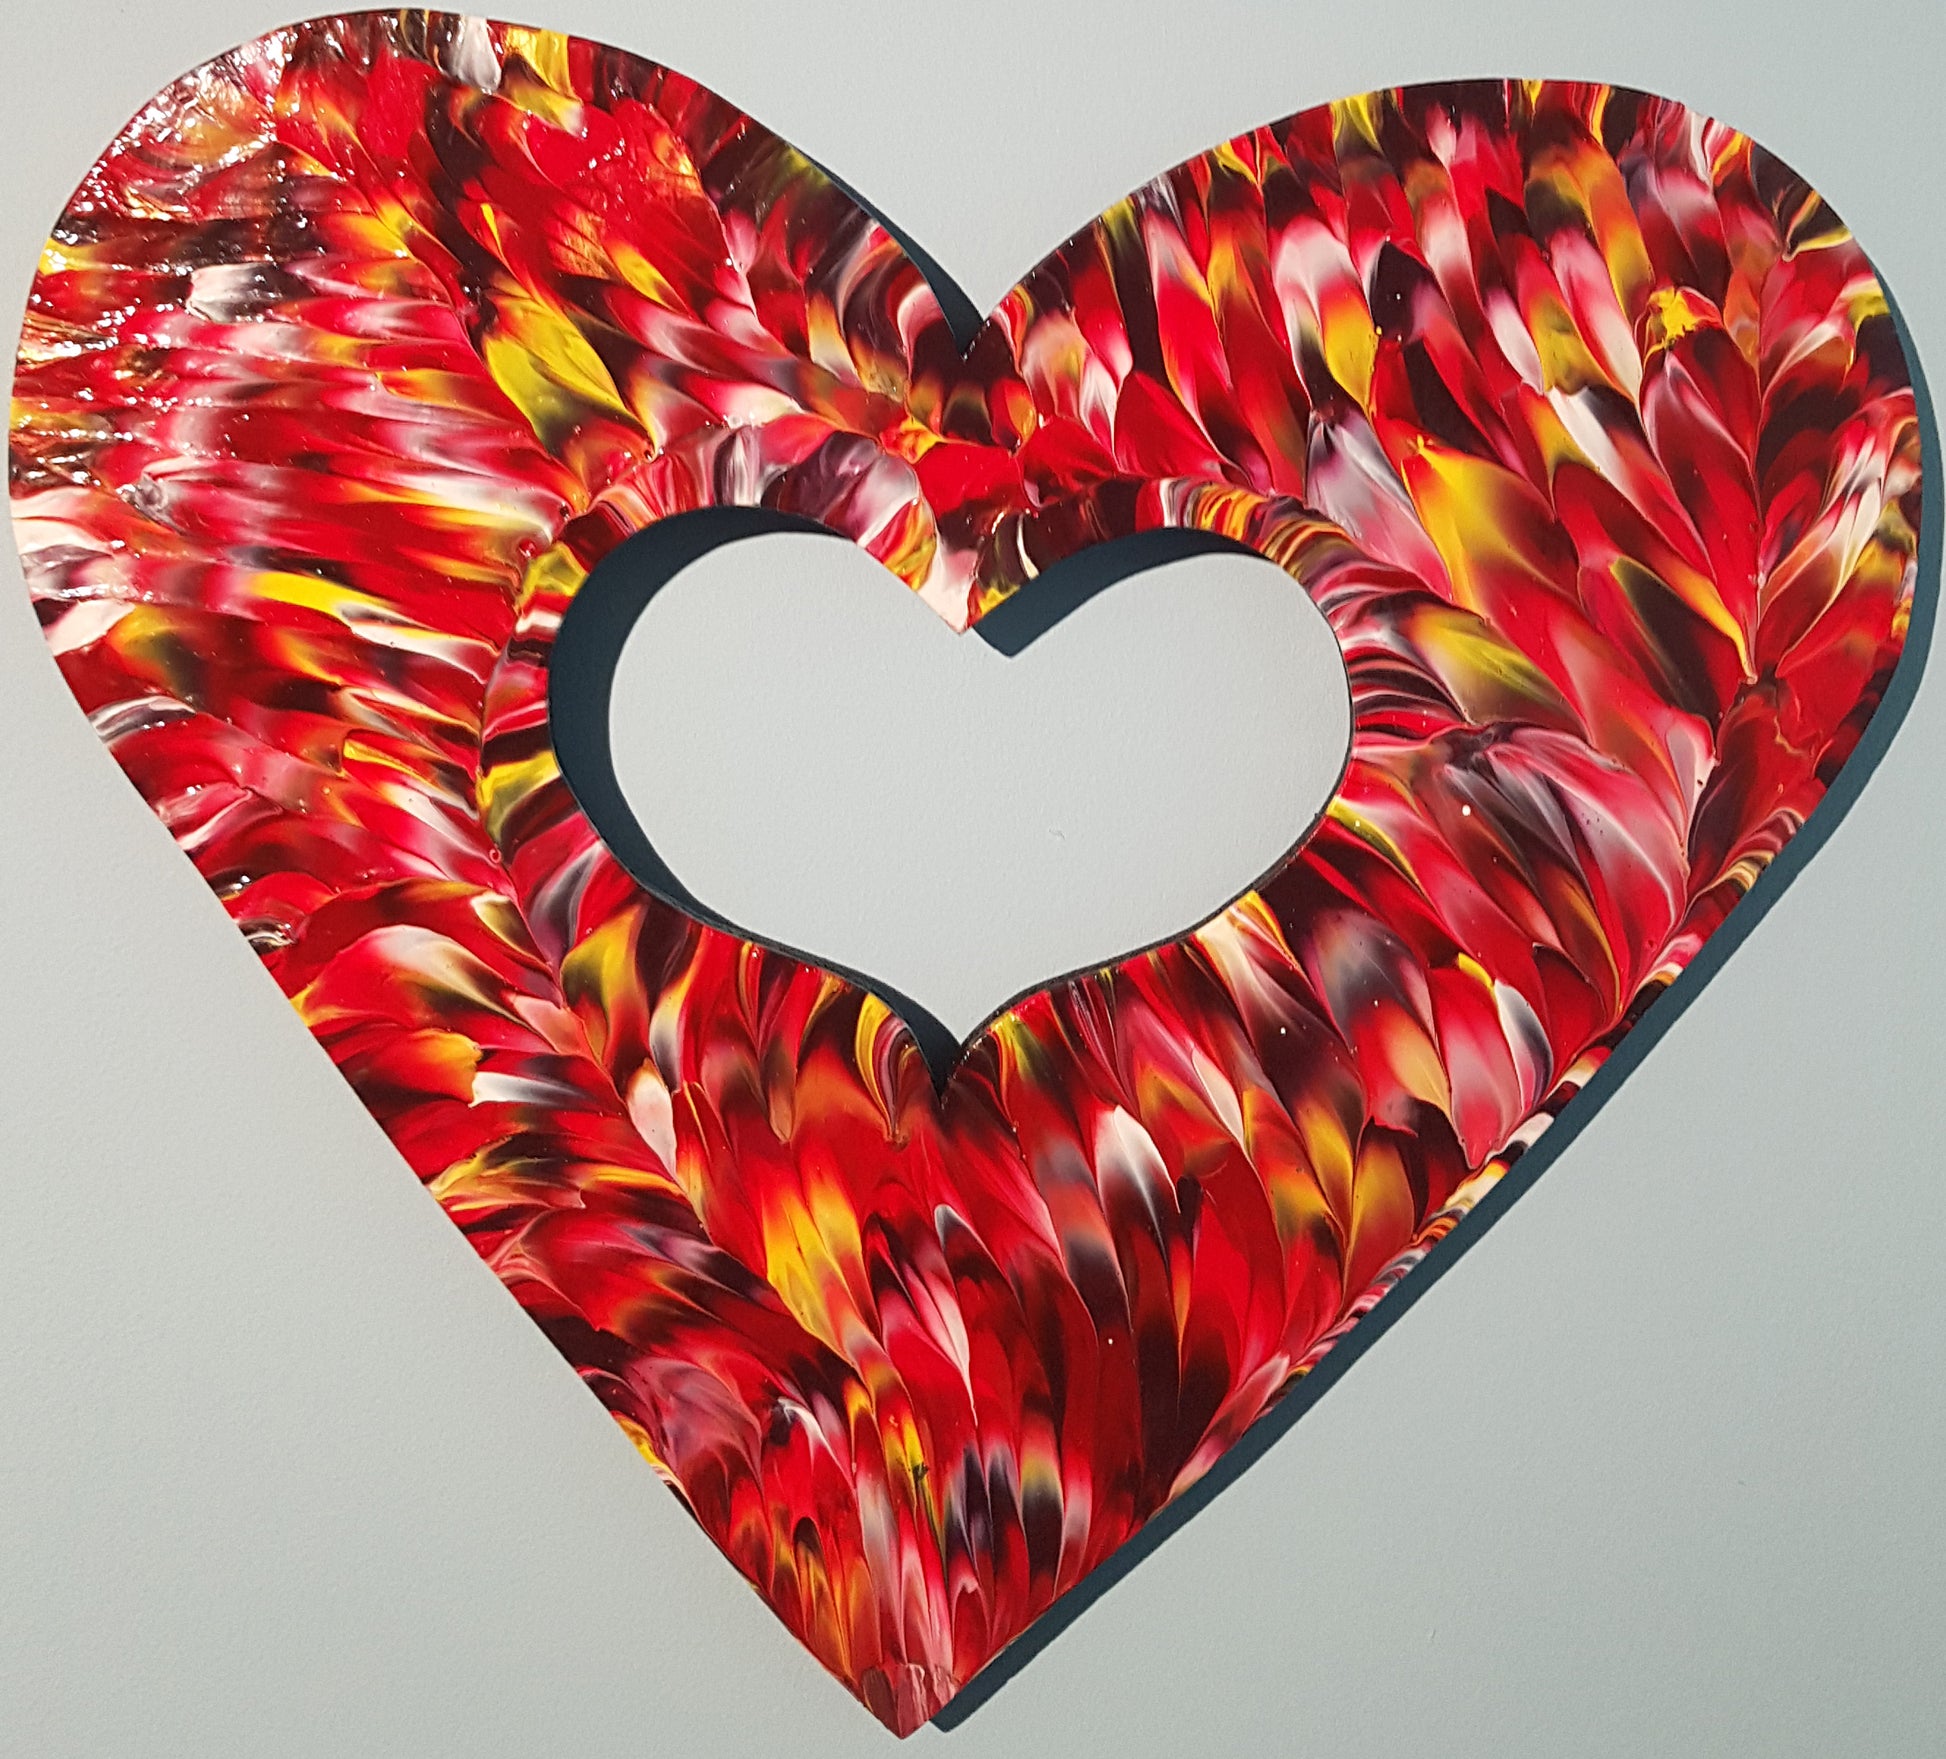 I-Love-You-With-All-My-Art-by-Alexandra-Romano-Unique-Abstracts-Red-Heart-Shaped-Custom-Made-Paintings-Toronto-Artists